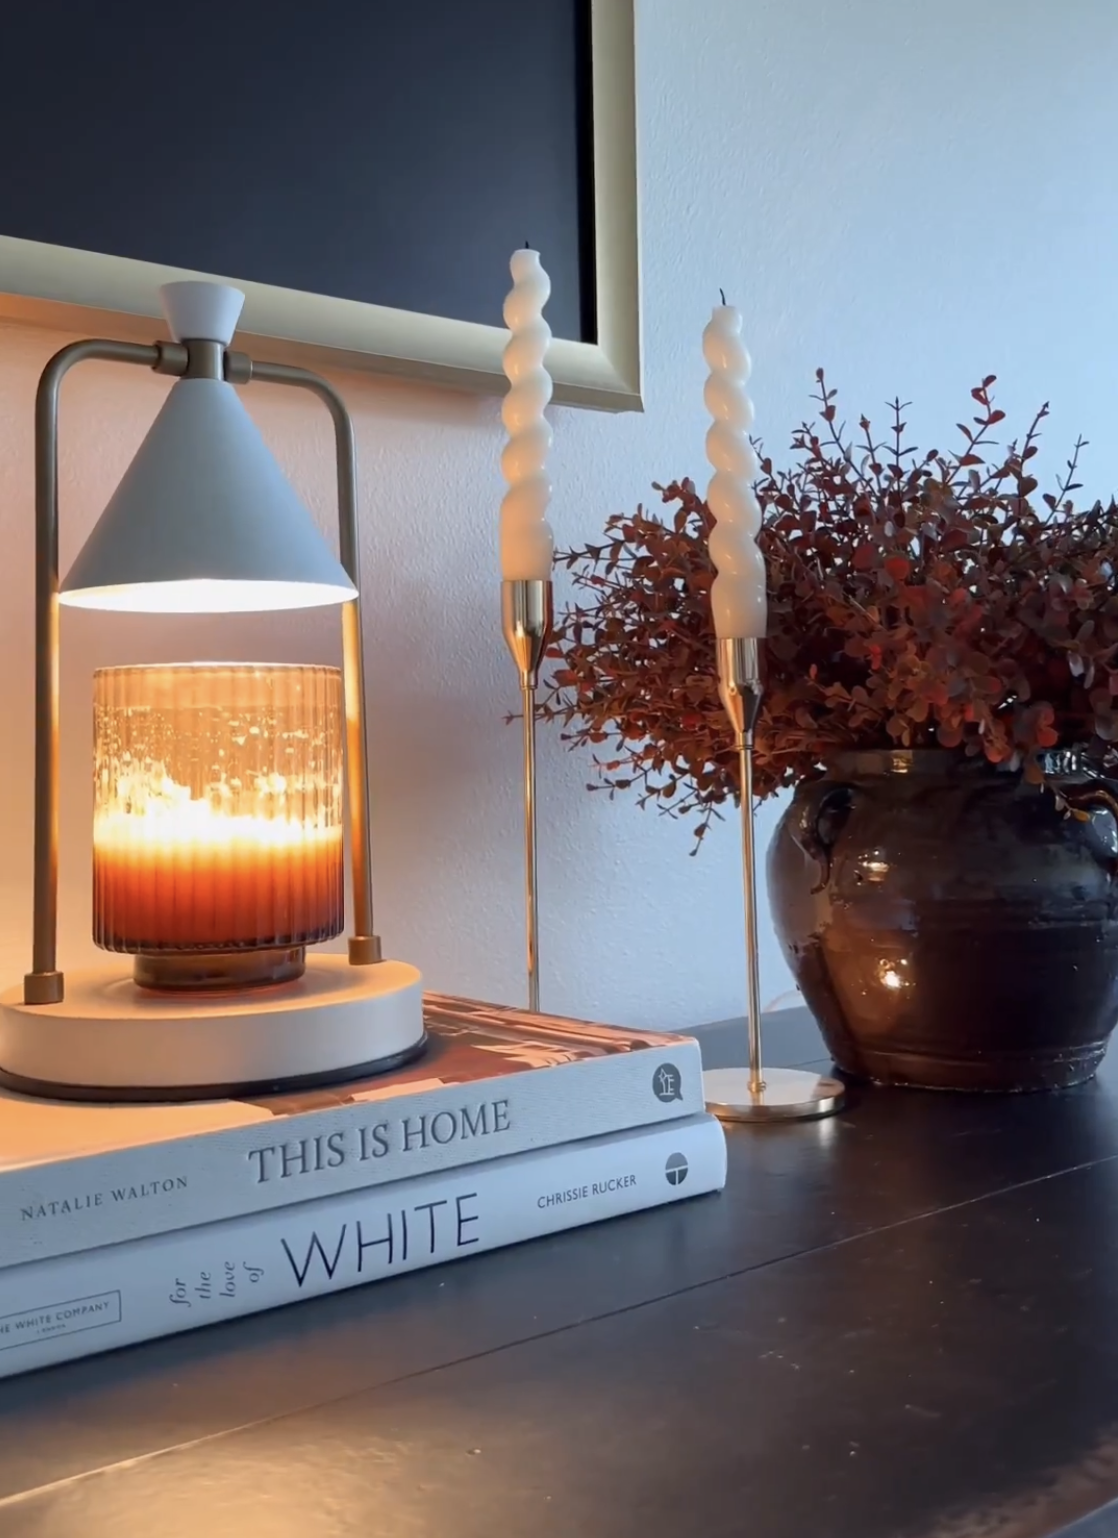 affordable luxury items for your home | #affordable #luxury #items #home #homedecor #candle #lamp #books #candlestick #taperedcandle #vase #fauxfloral